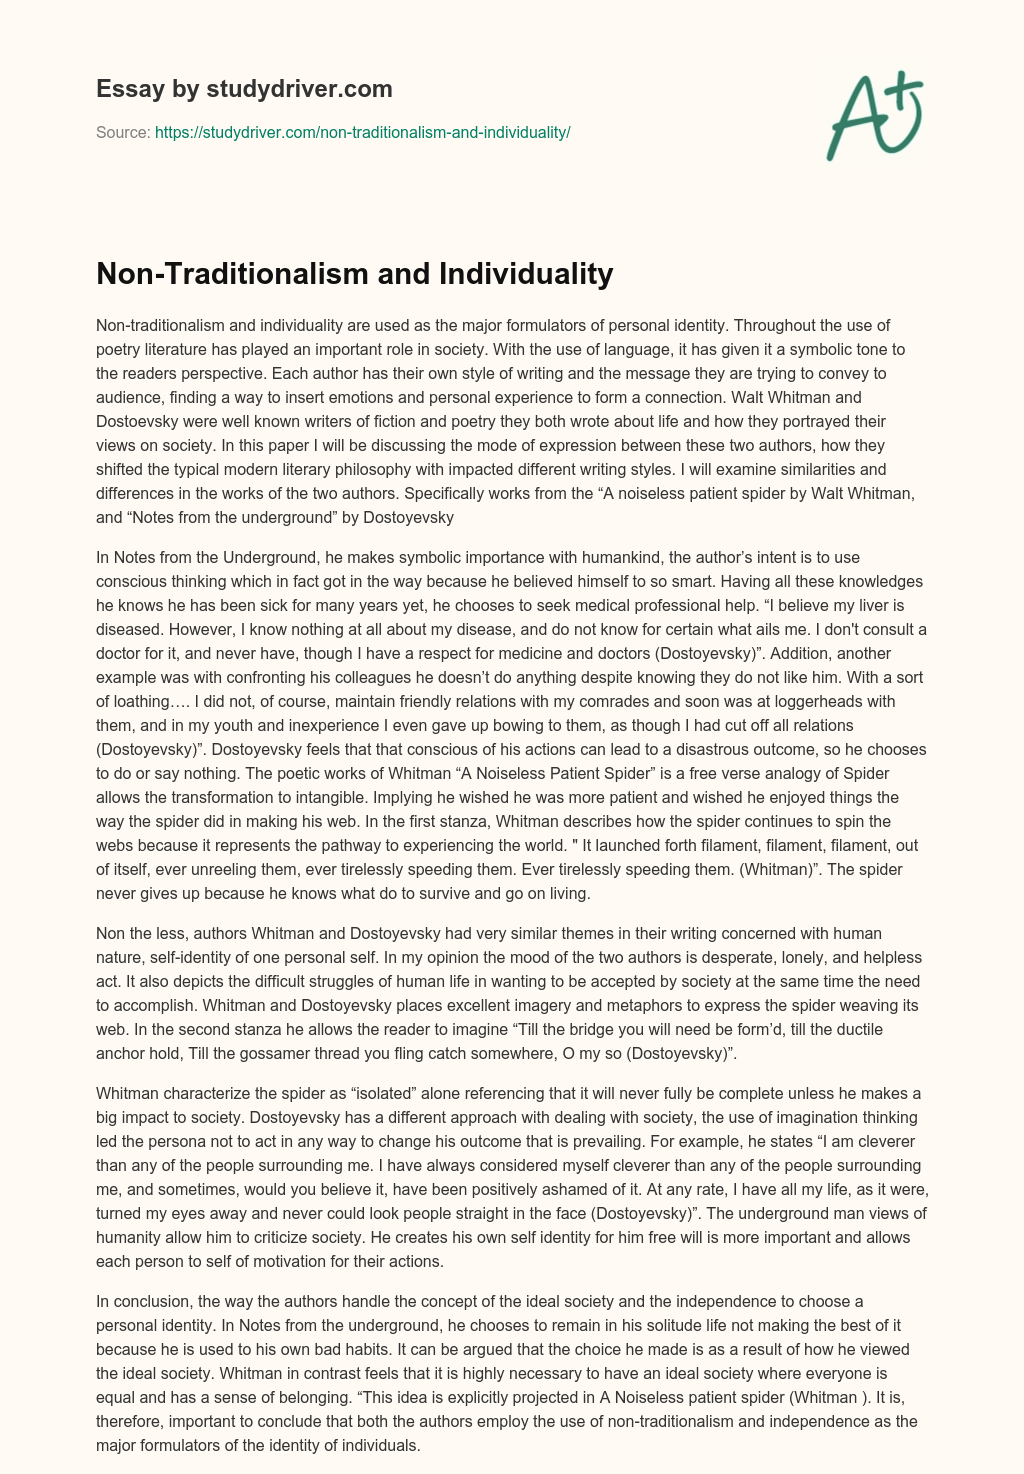 Non-Traditionalism and Individuality essay